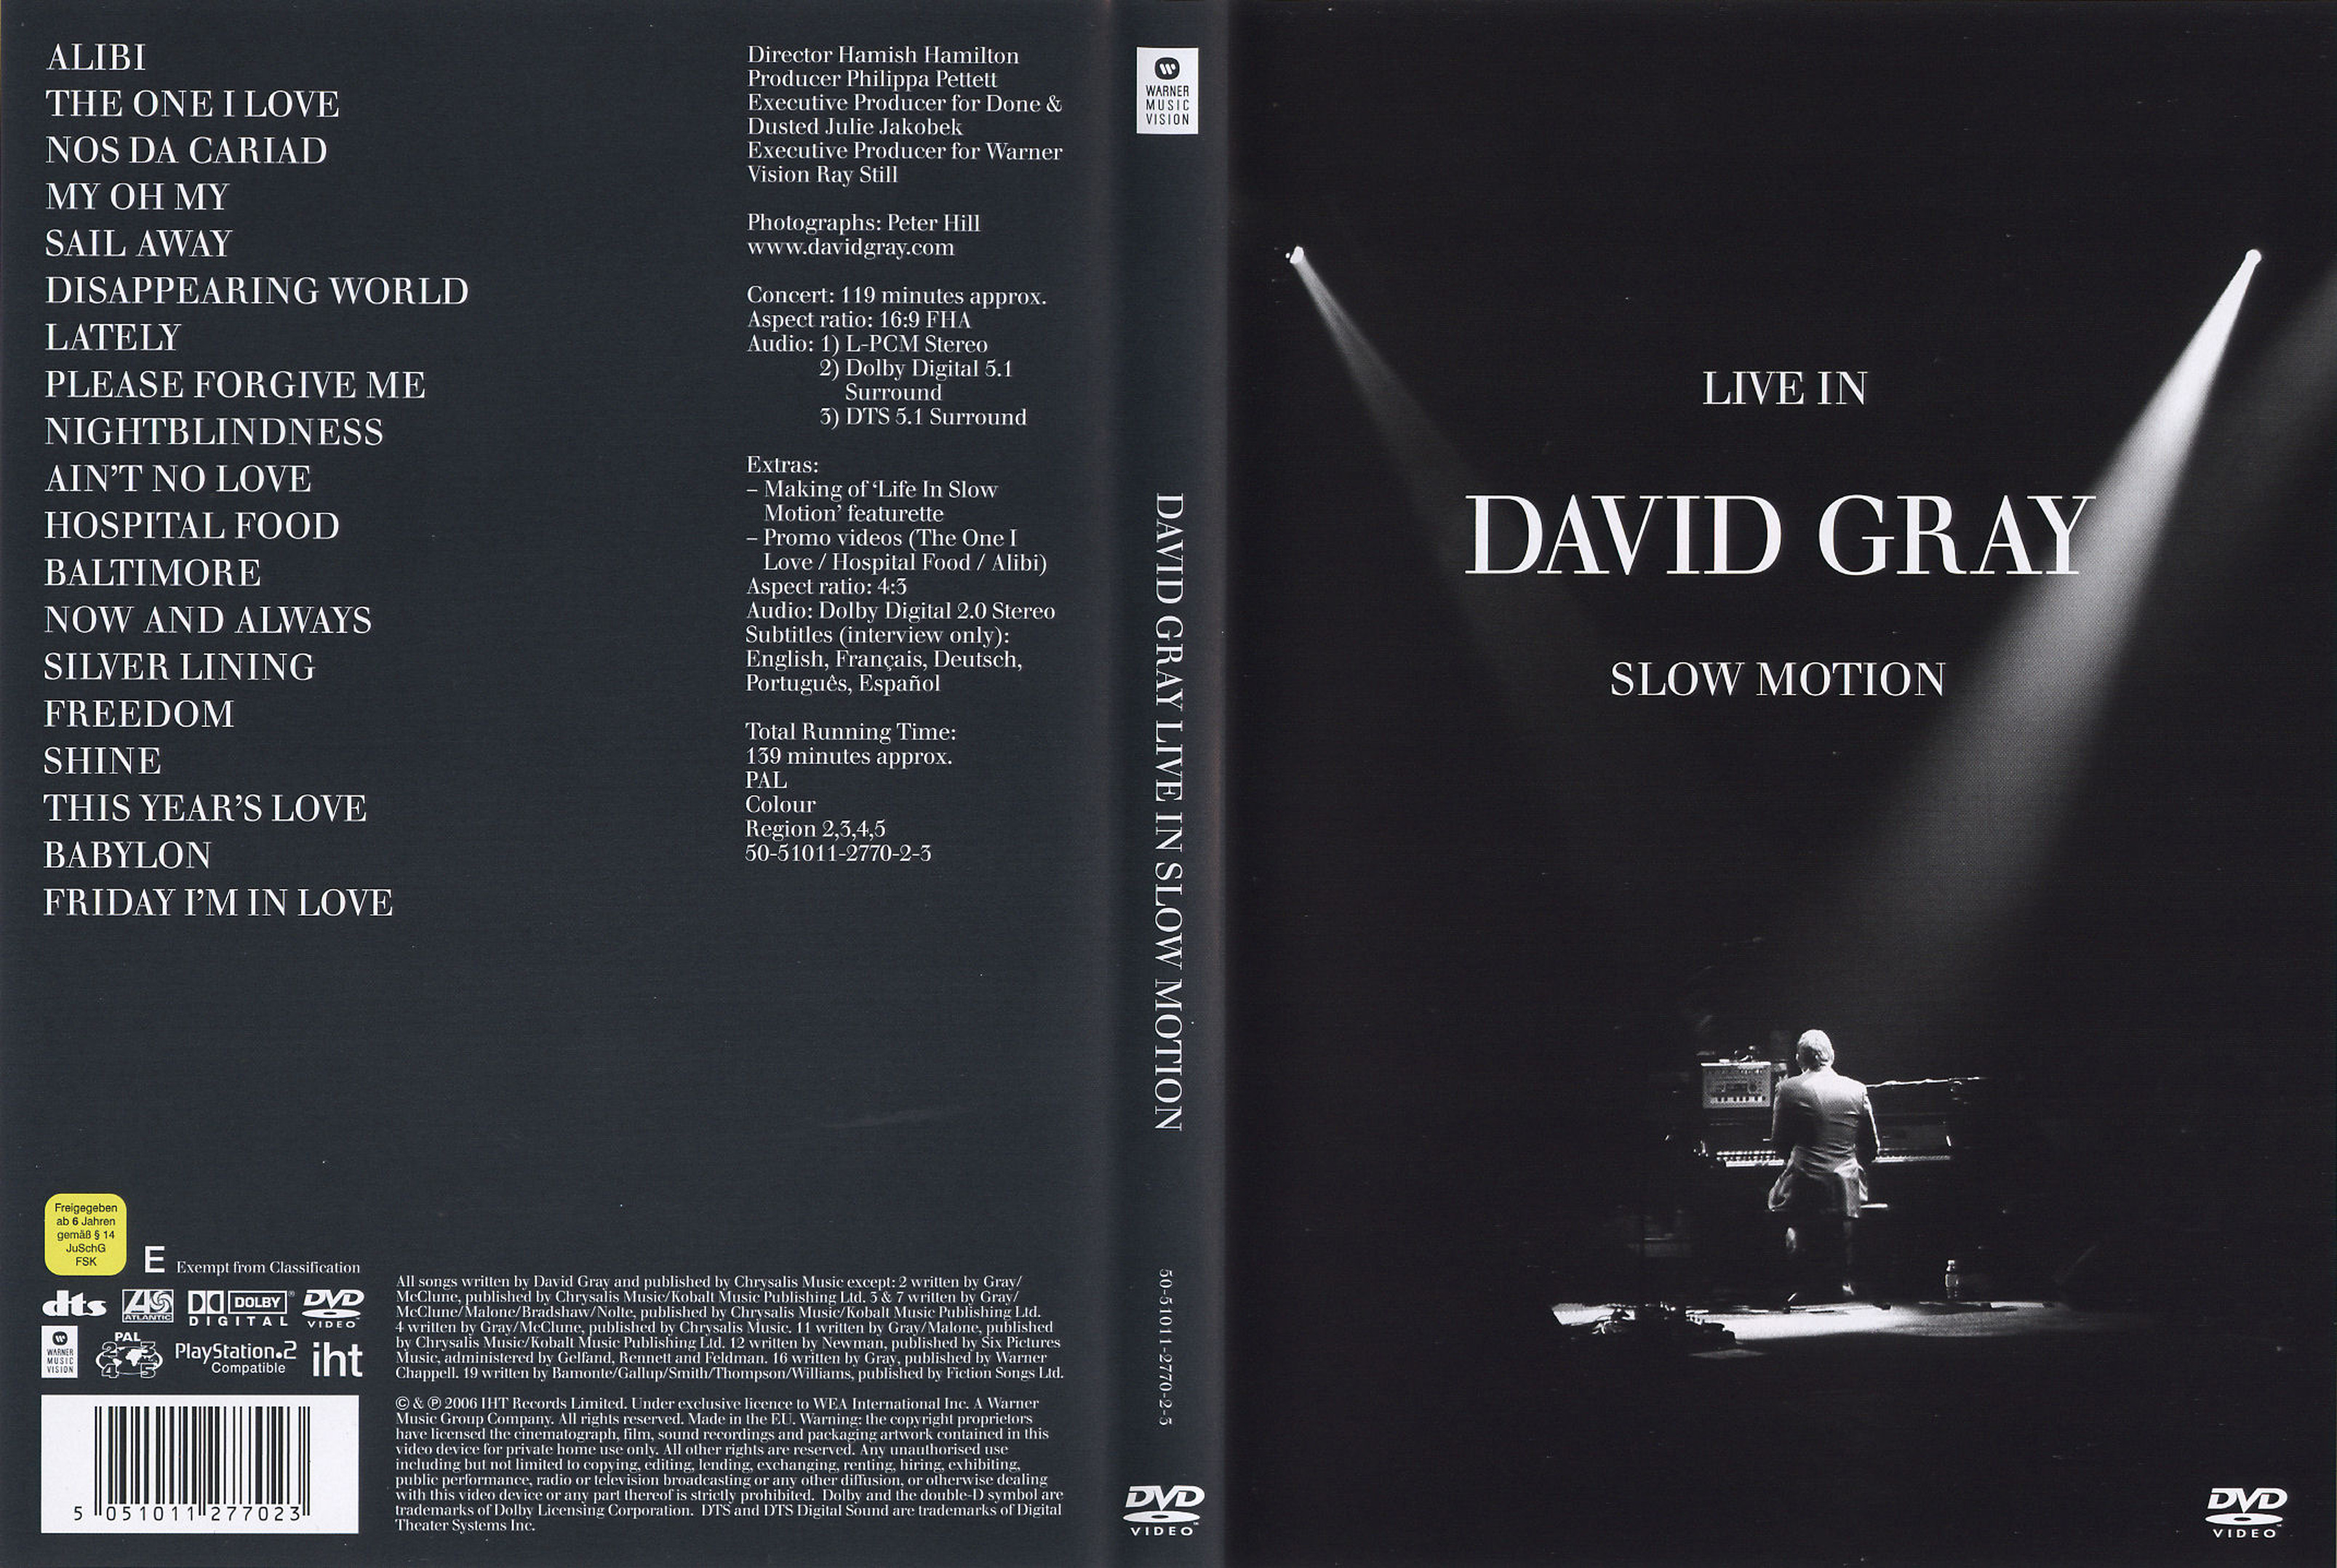 Jaquette DVD David Gray live in slow motion